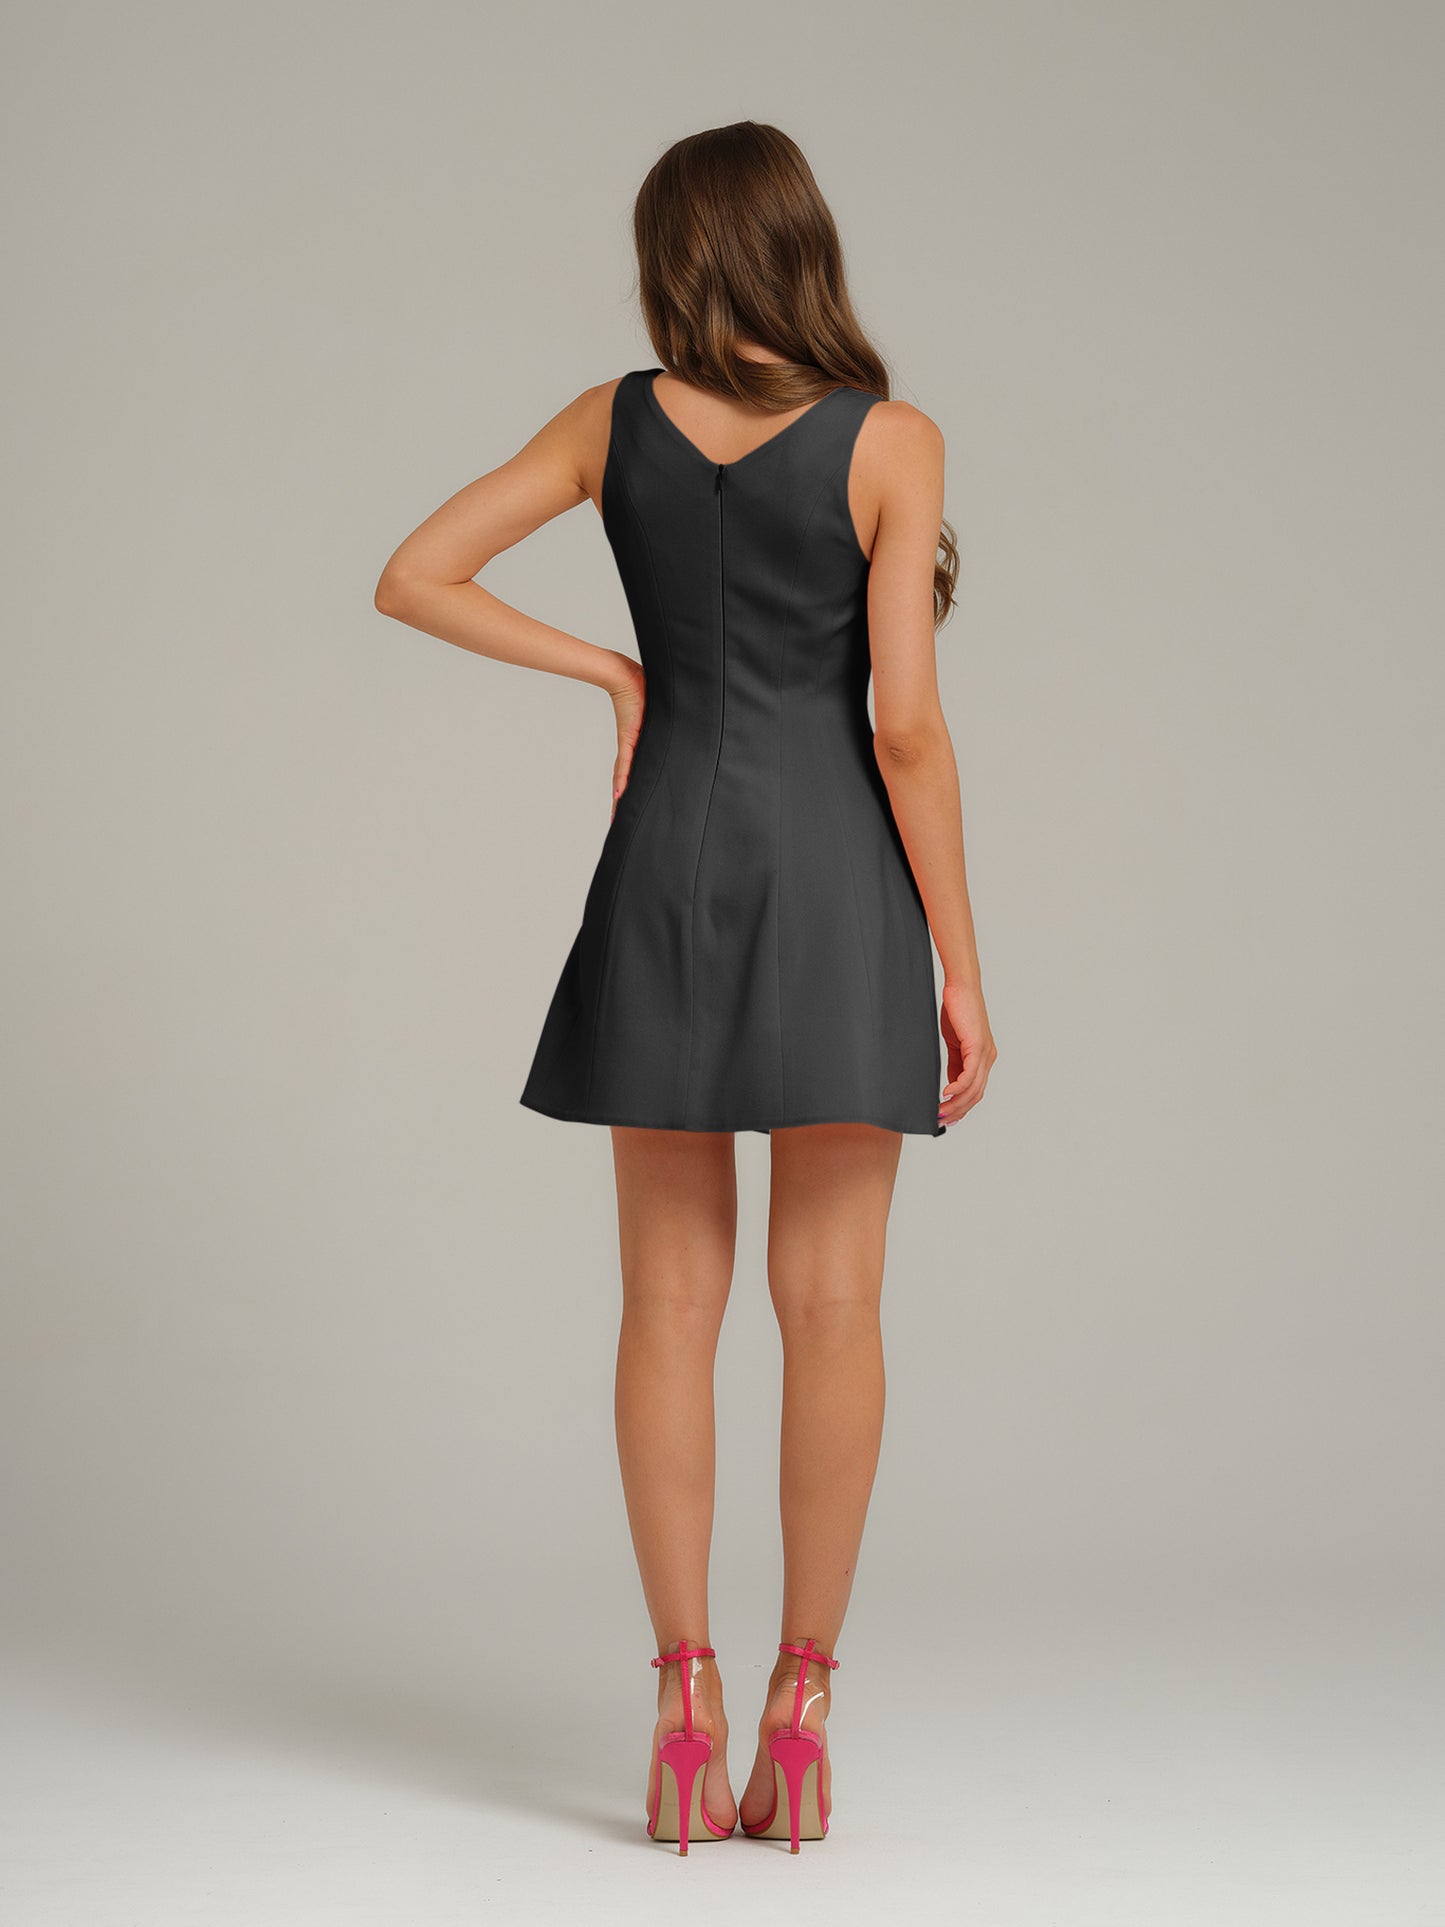 Tia DorraineLove Letter Flared Mini Dress - Magnetic BlackBring an air of effortless femininity to your edits with this romantic mini dress. Its sleeveless silhouette is cut from stretch crepe, detailed with a flattering sweetheart neckline, and a flared